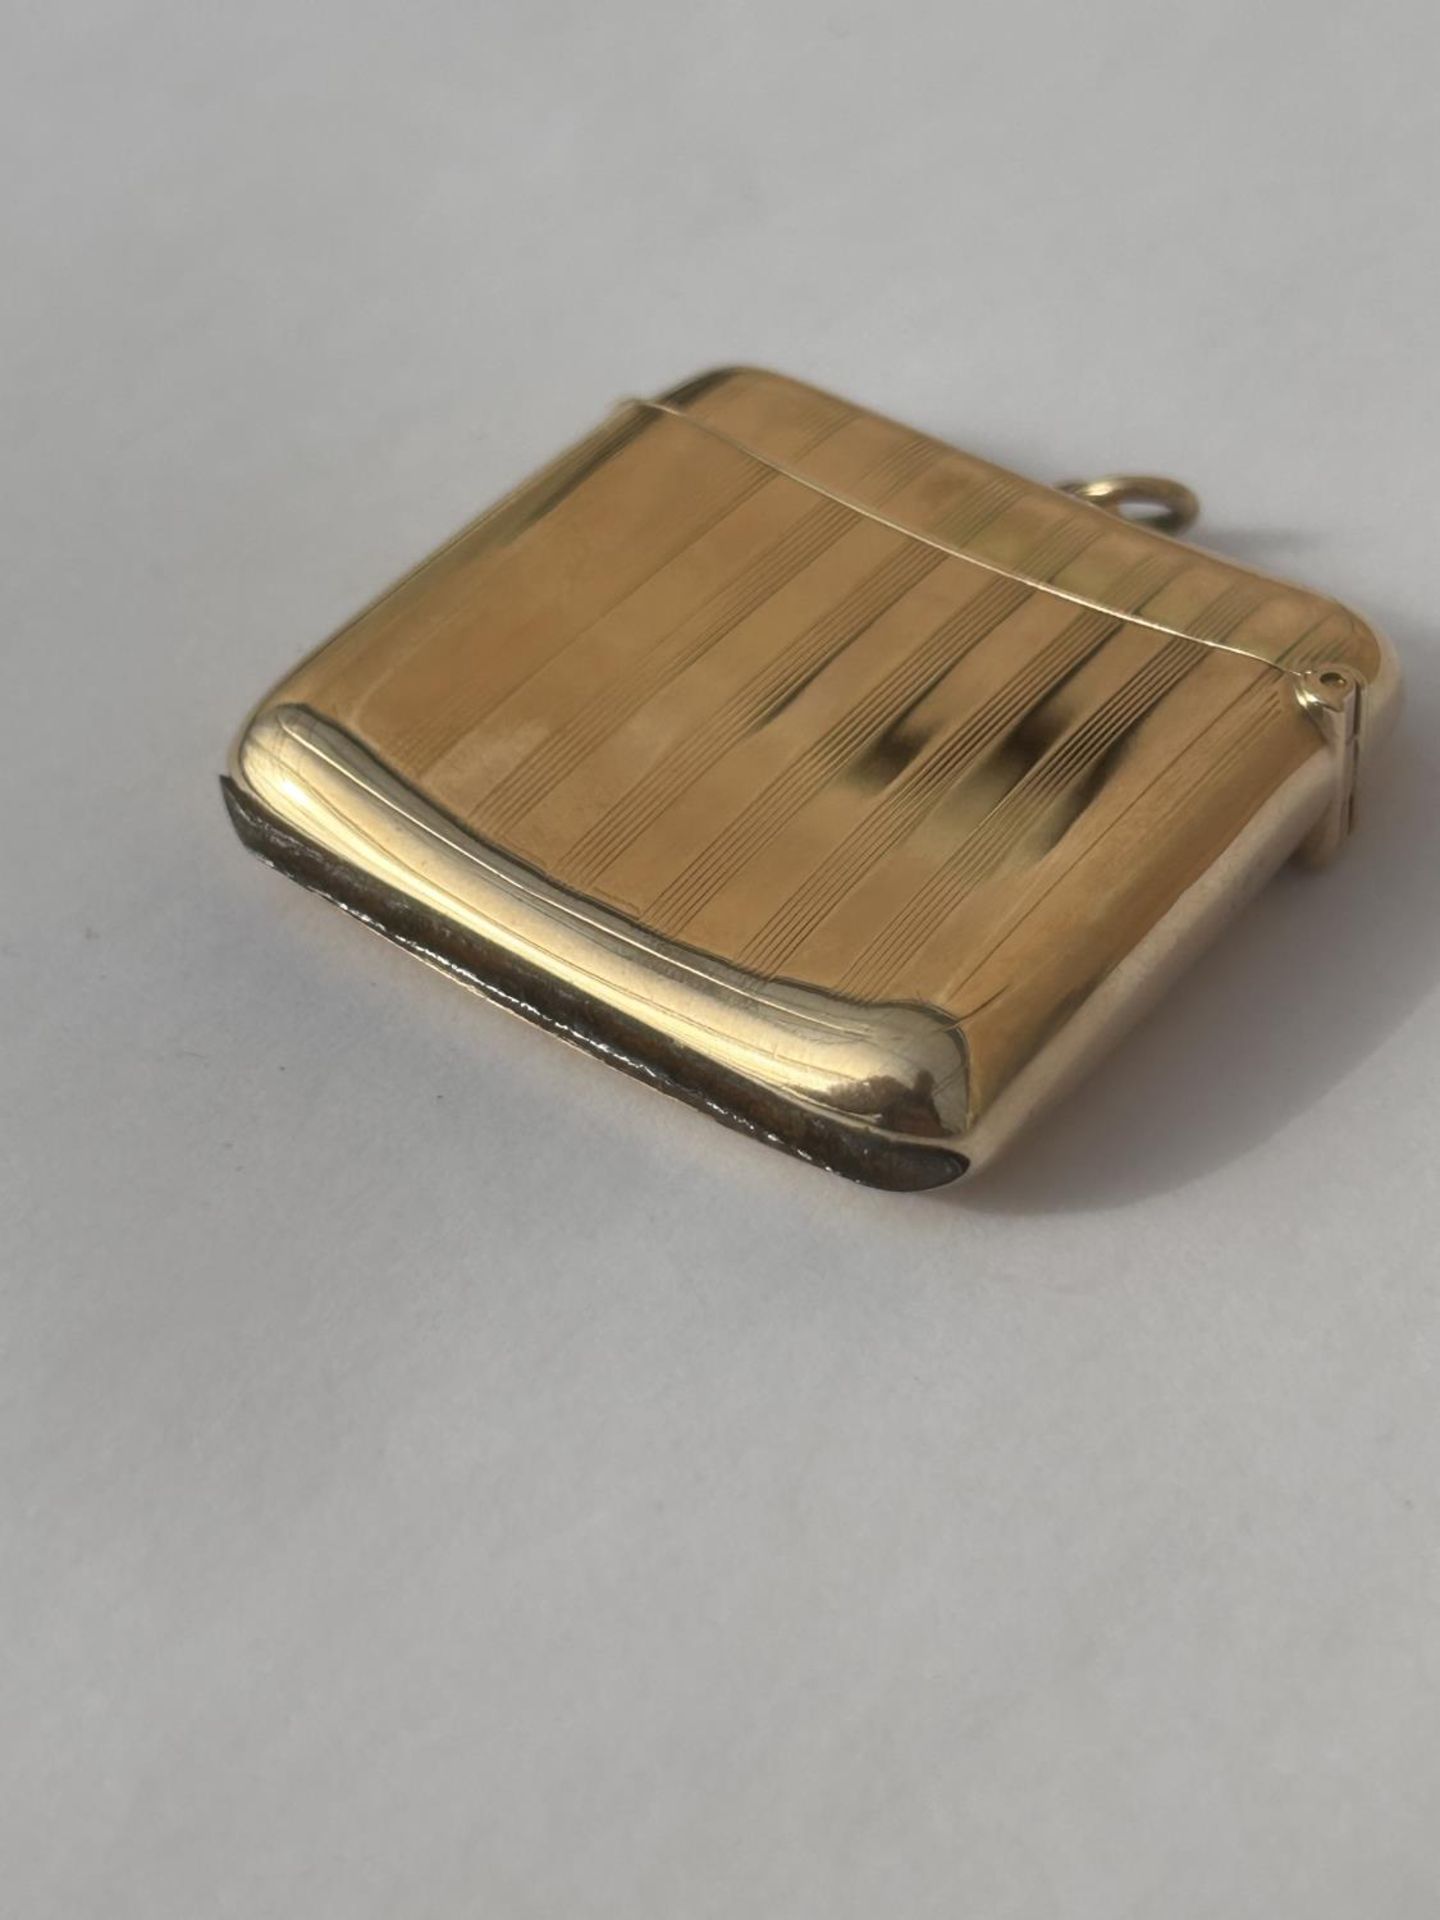 A 9CT GOLD FULLY HALLMARKED ENGINE TURNED VESTA CASE WITH FLIP TOP COVER & SUSPENSION LOOP WEIGHT - Image 4 of 5